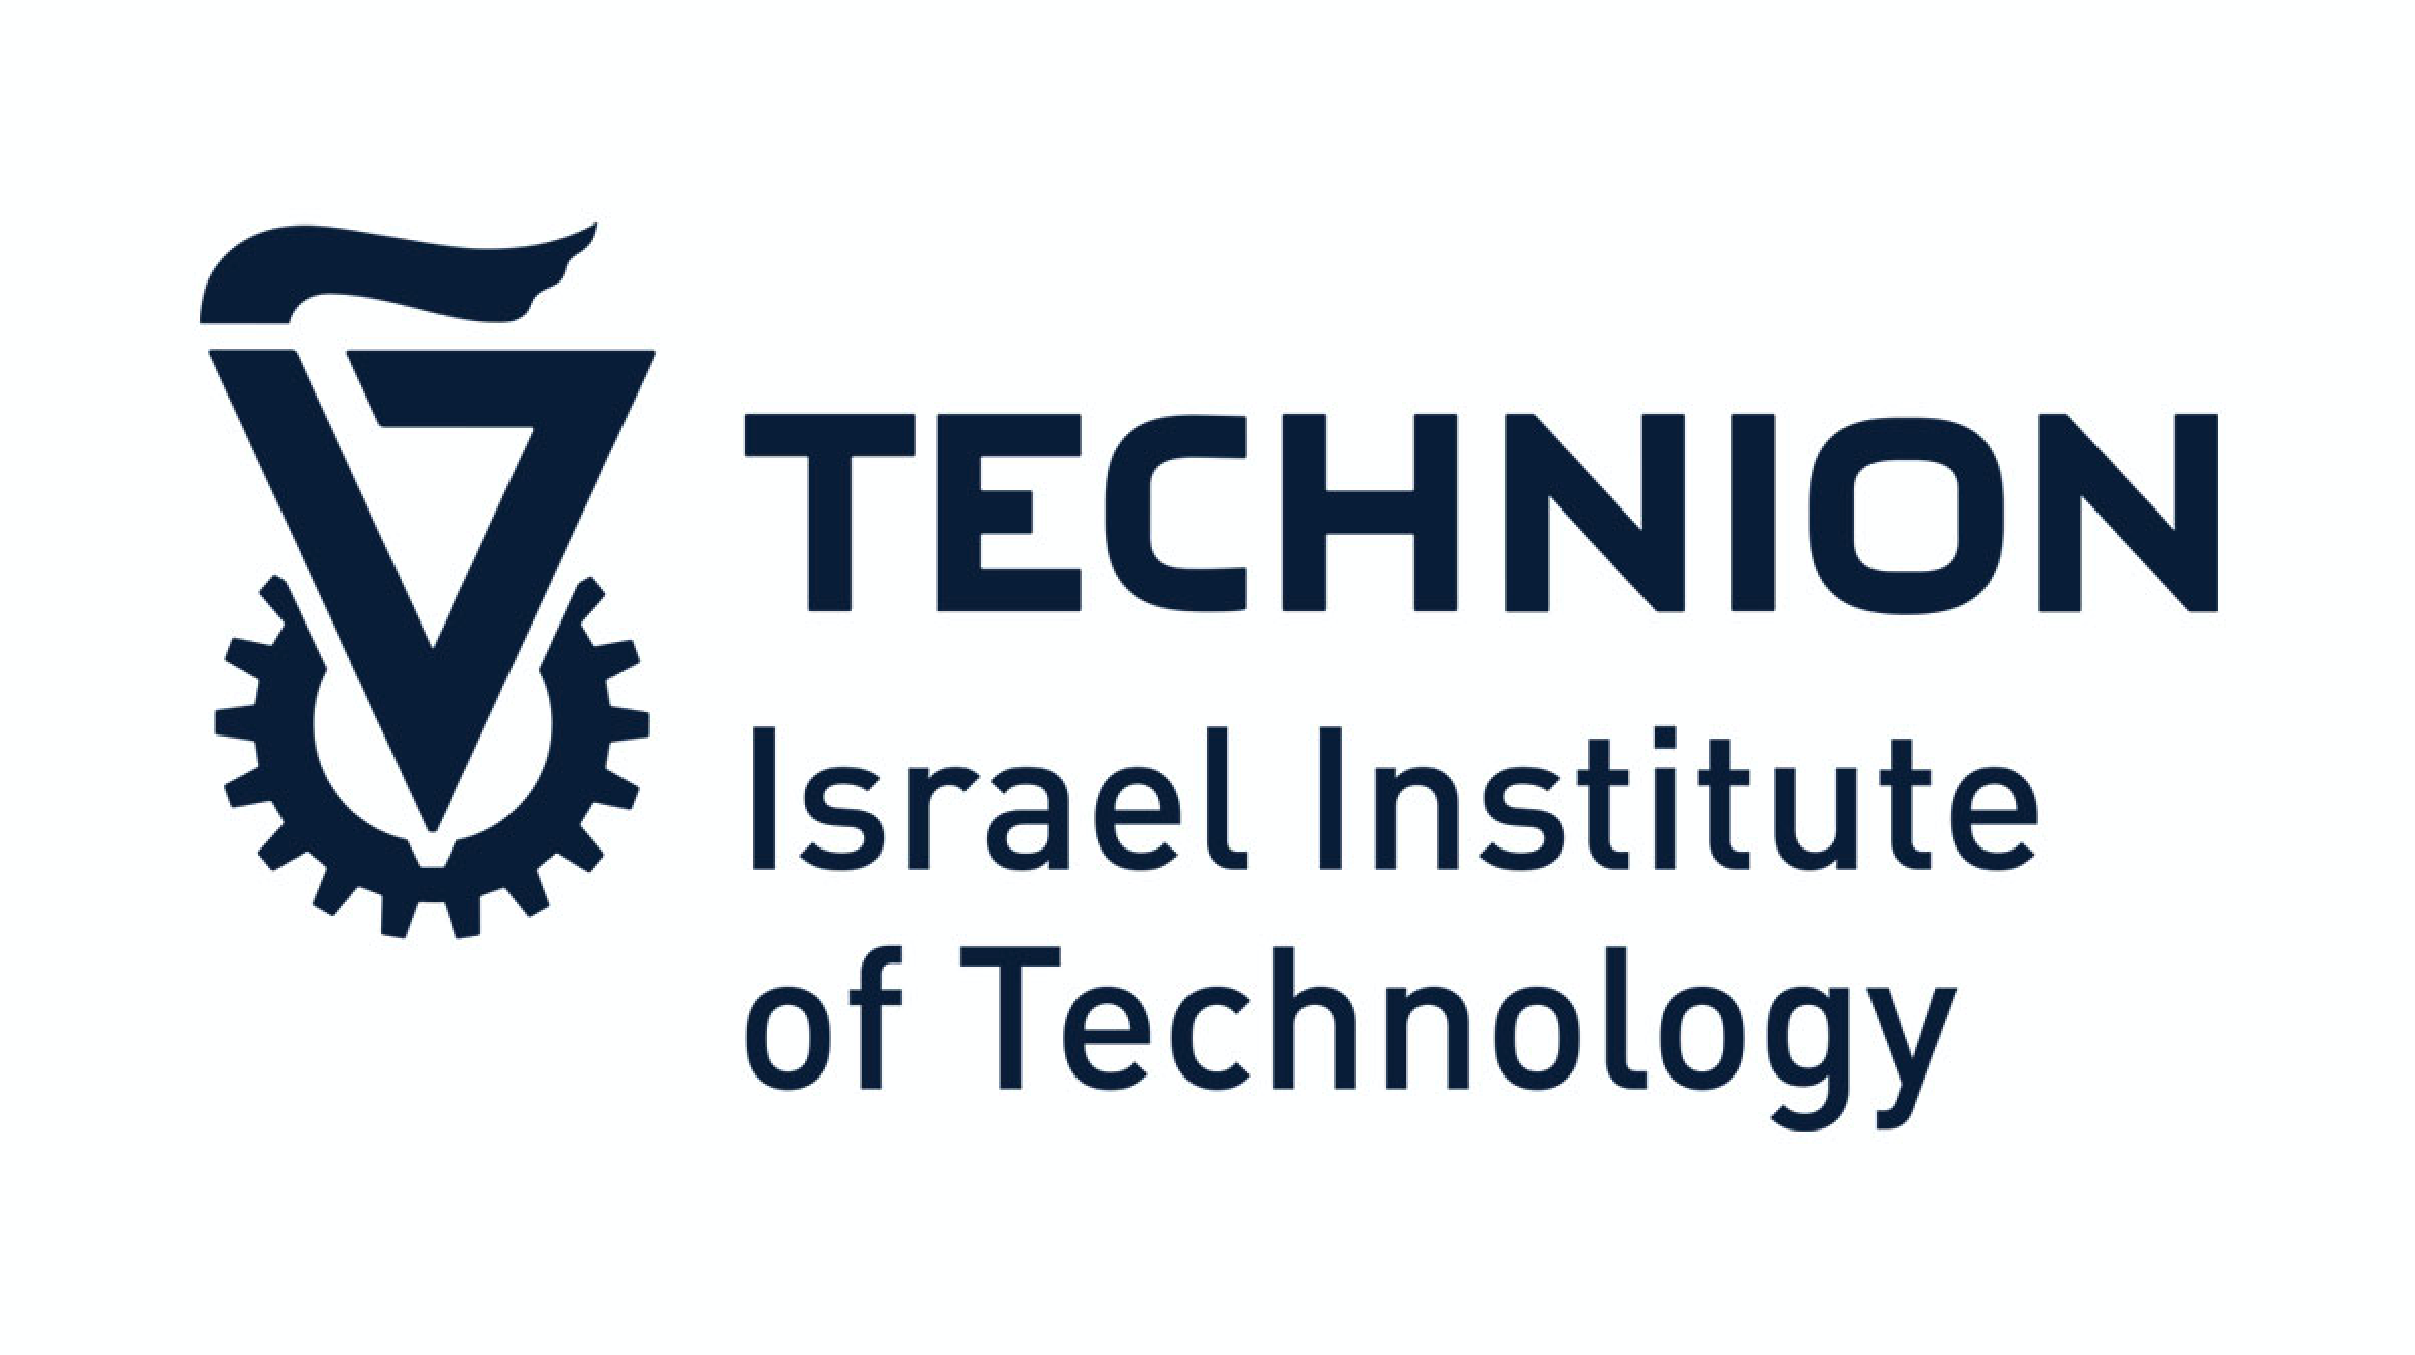 TECHNION – ISRAEL INSTITUTE OF TECHNOLOGY